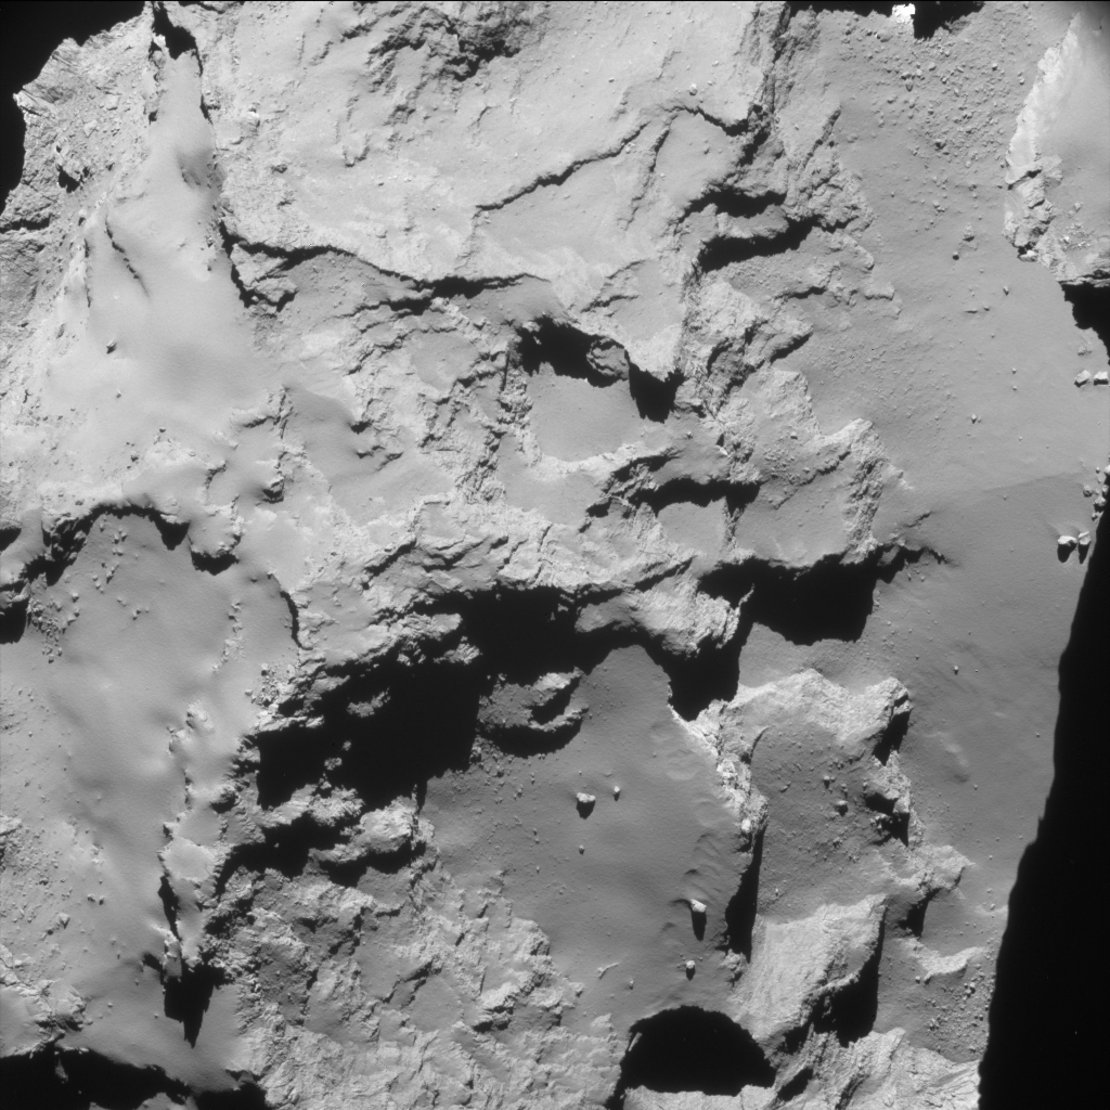 Comet 67P from 12.4 miles (20 km)